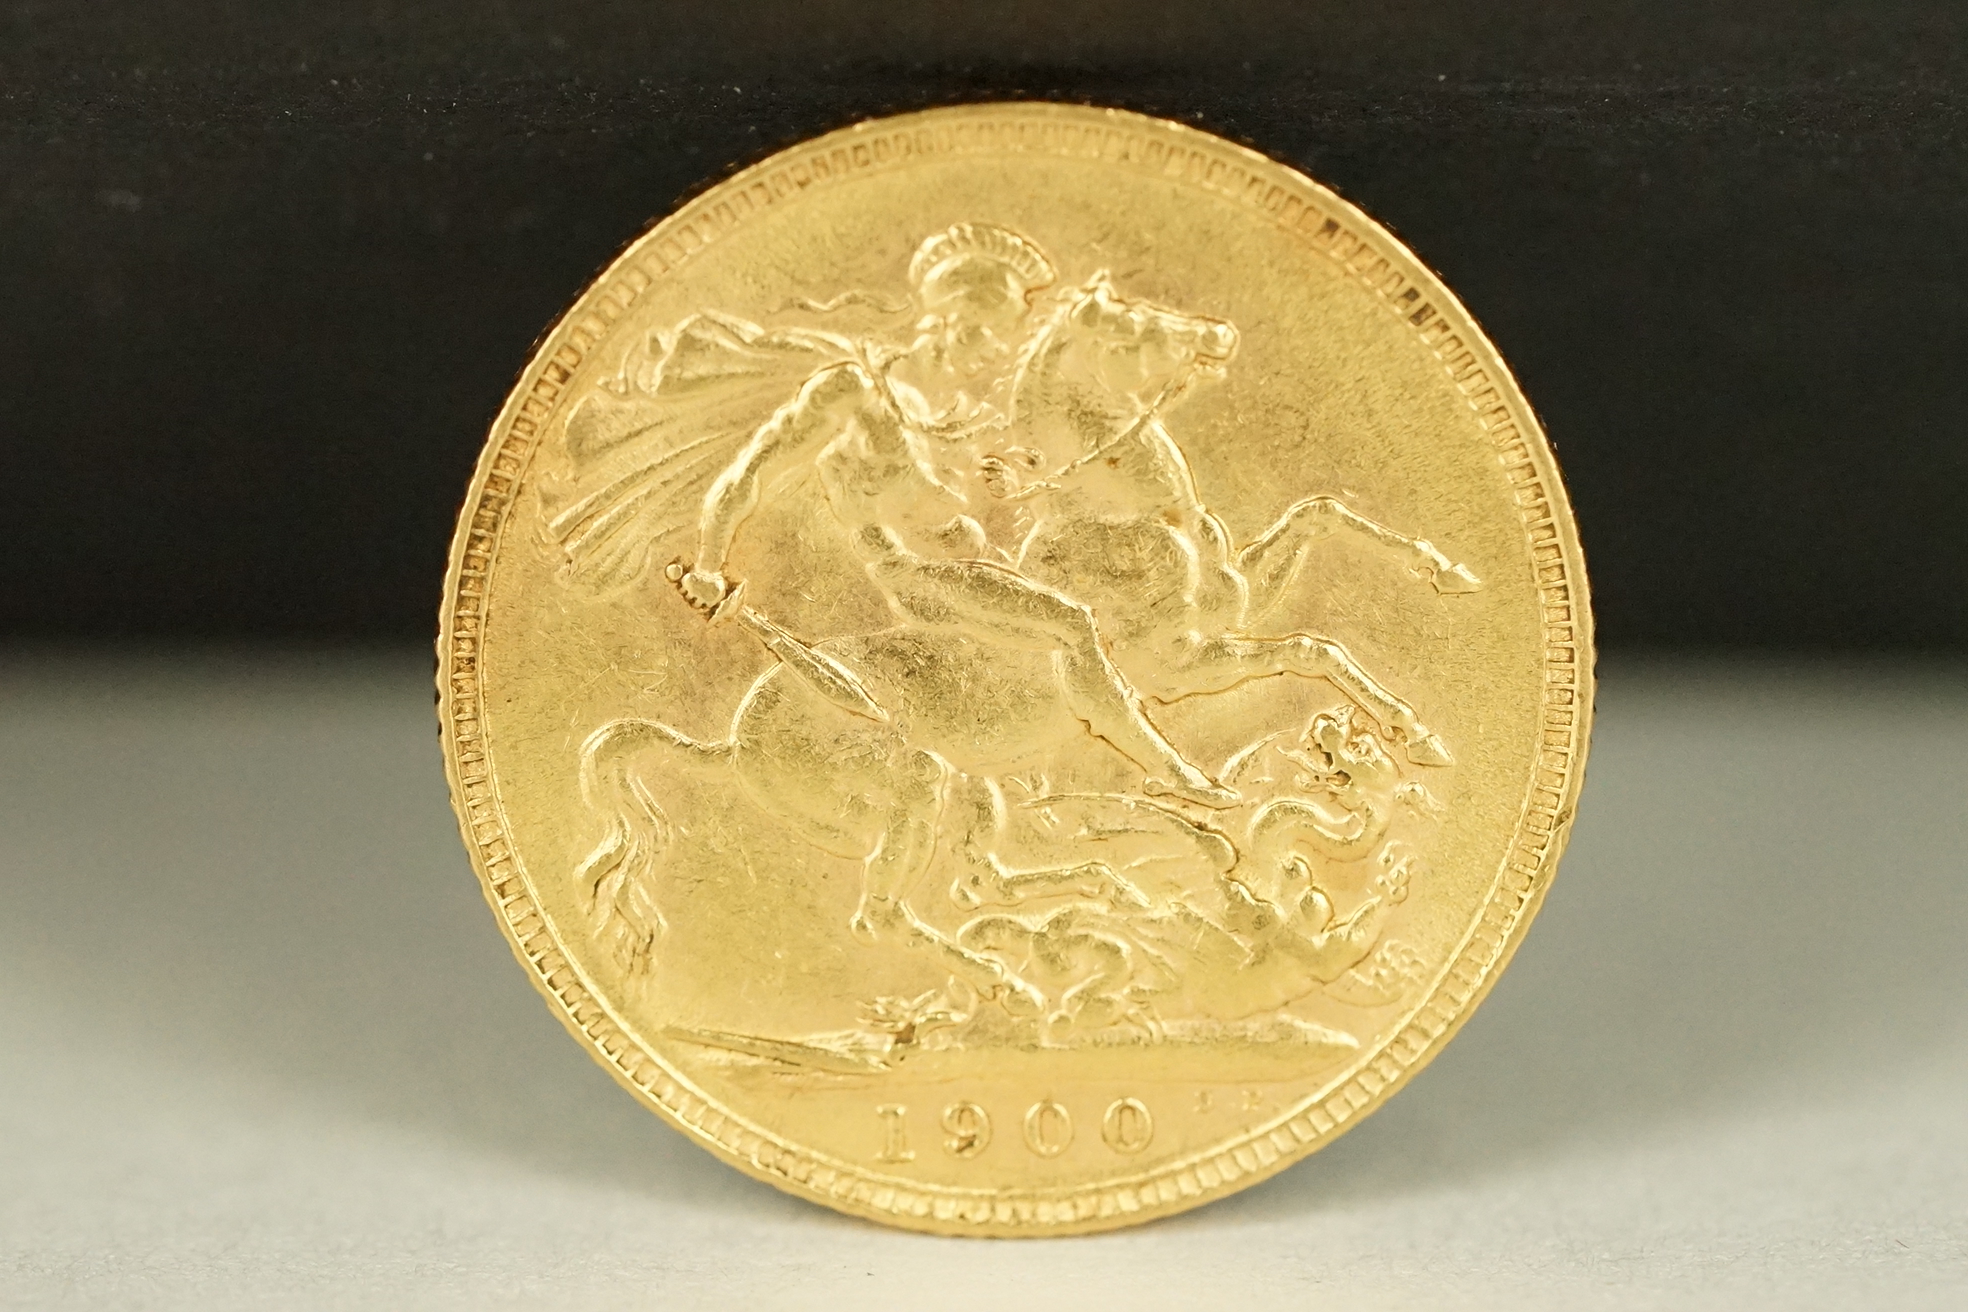 A British Queen Victoria 1900 gold full sovereign coin.